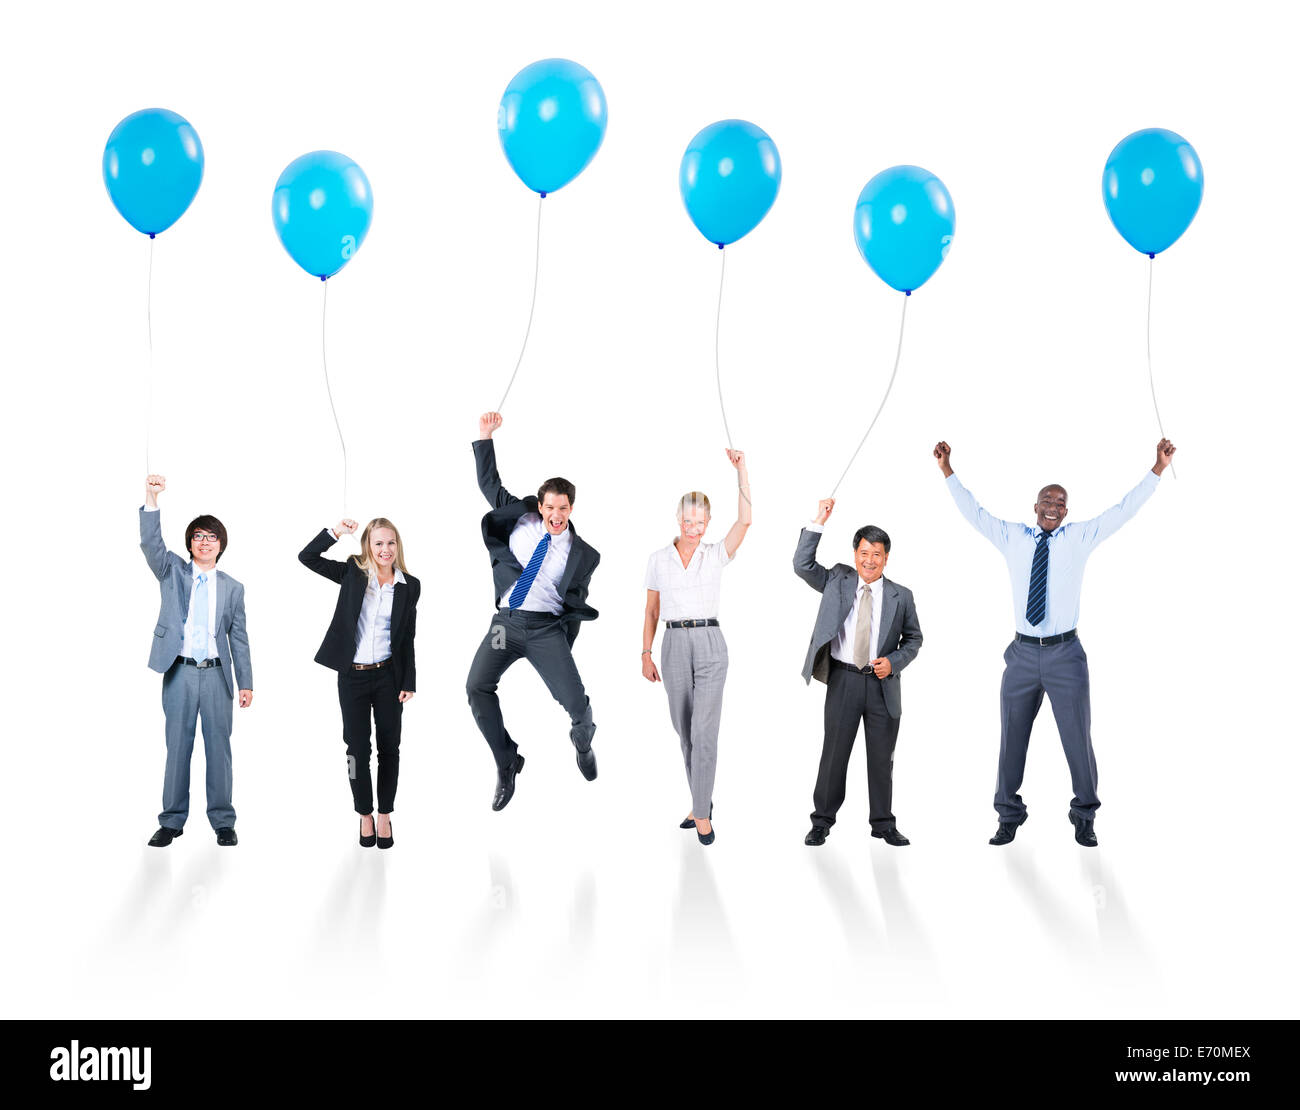 Playful Multiethnic Business People Holding Balloons Stock Photo